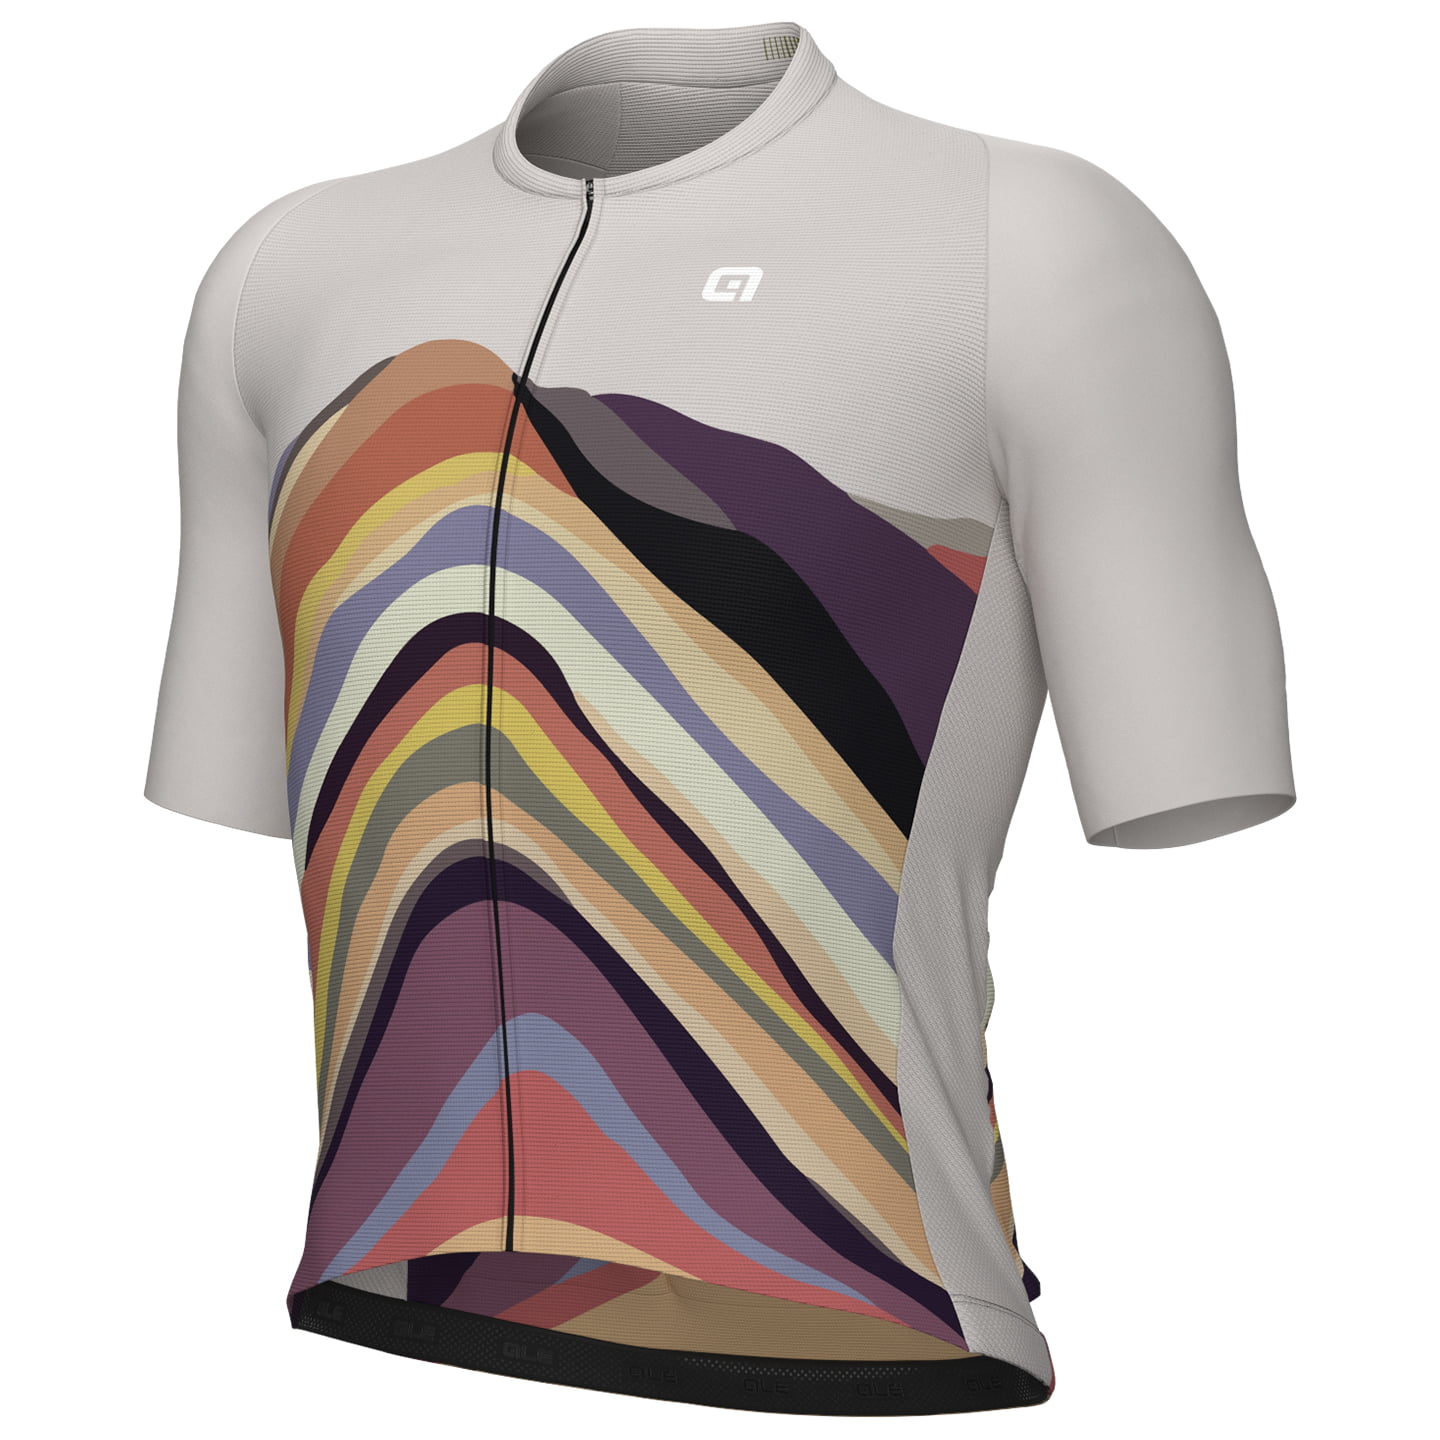 ALE Rainbow Short Sleeve Jersey, for men, size S, Cycling jersey, Cycling clothing